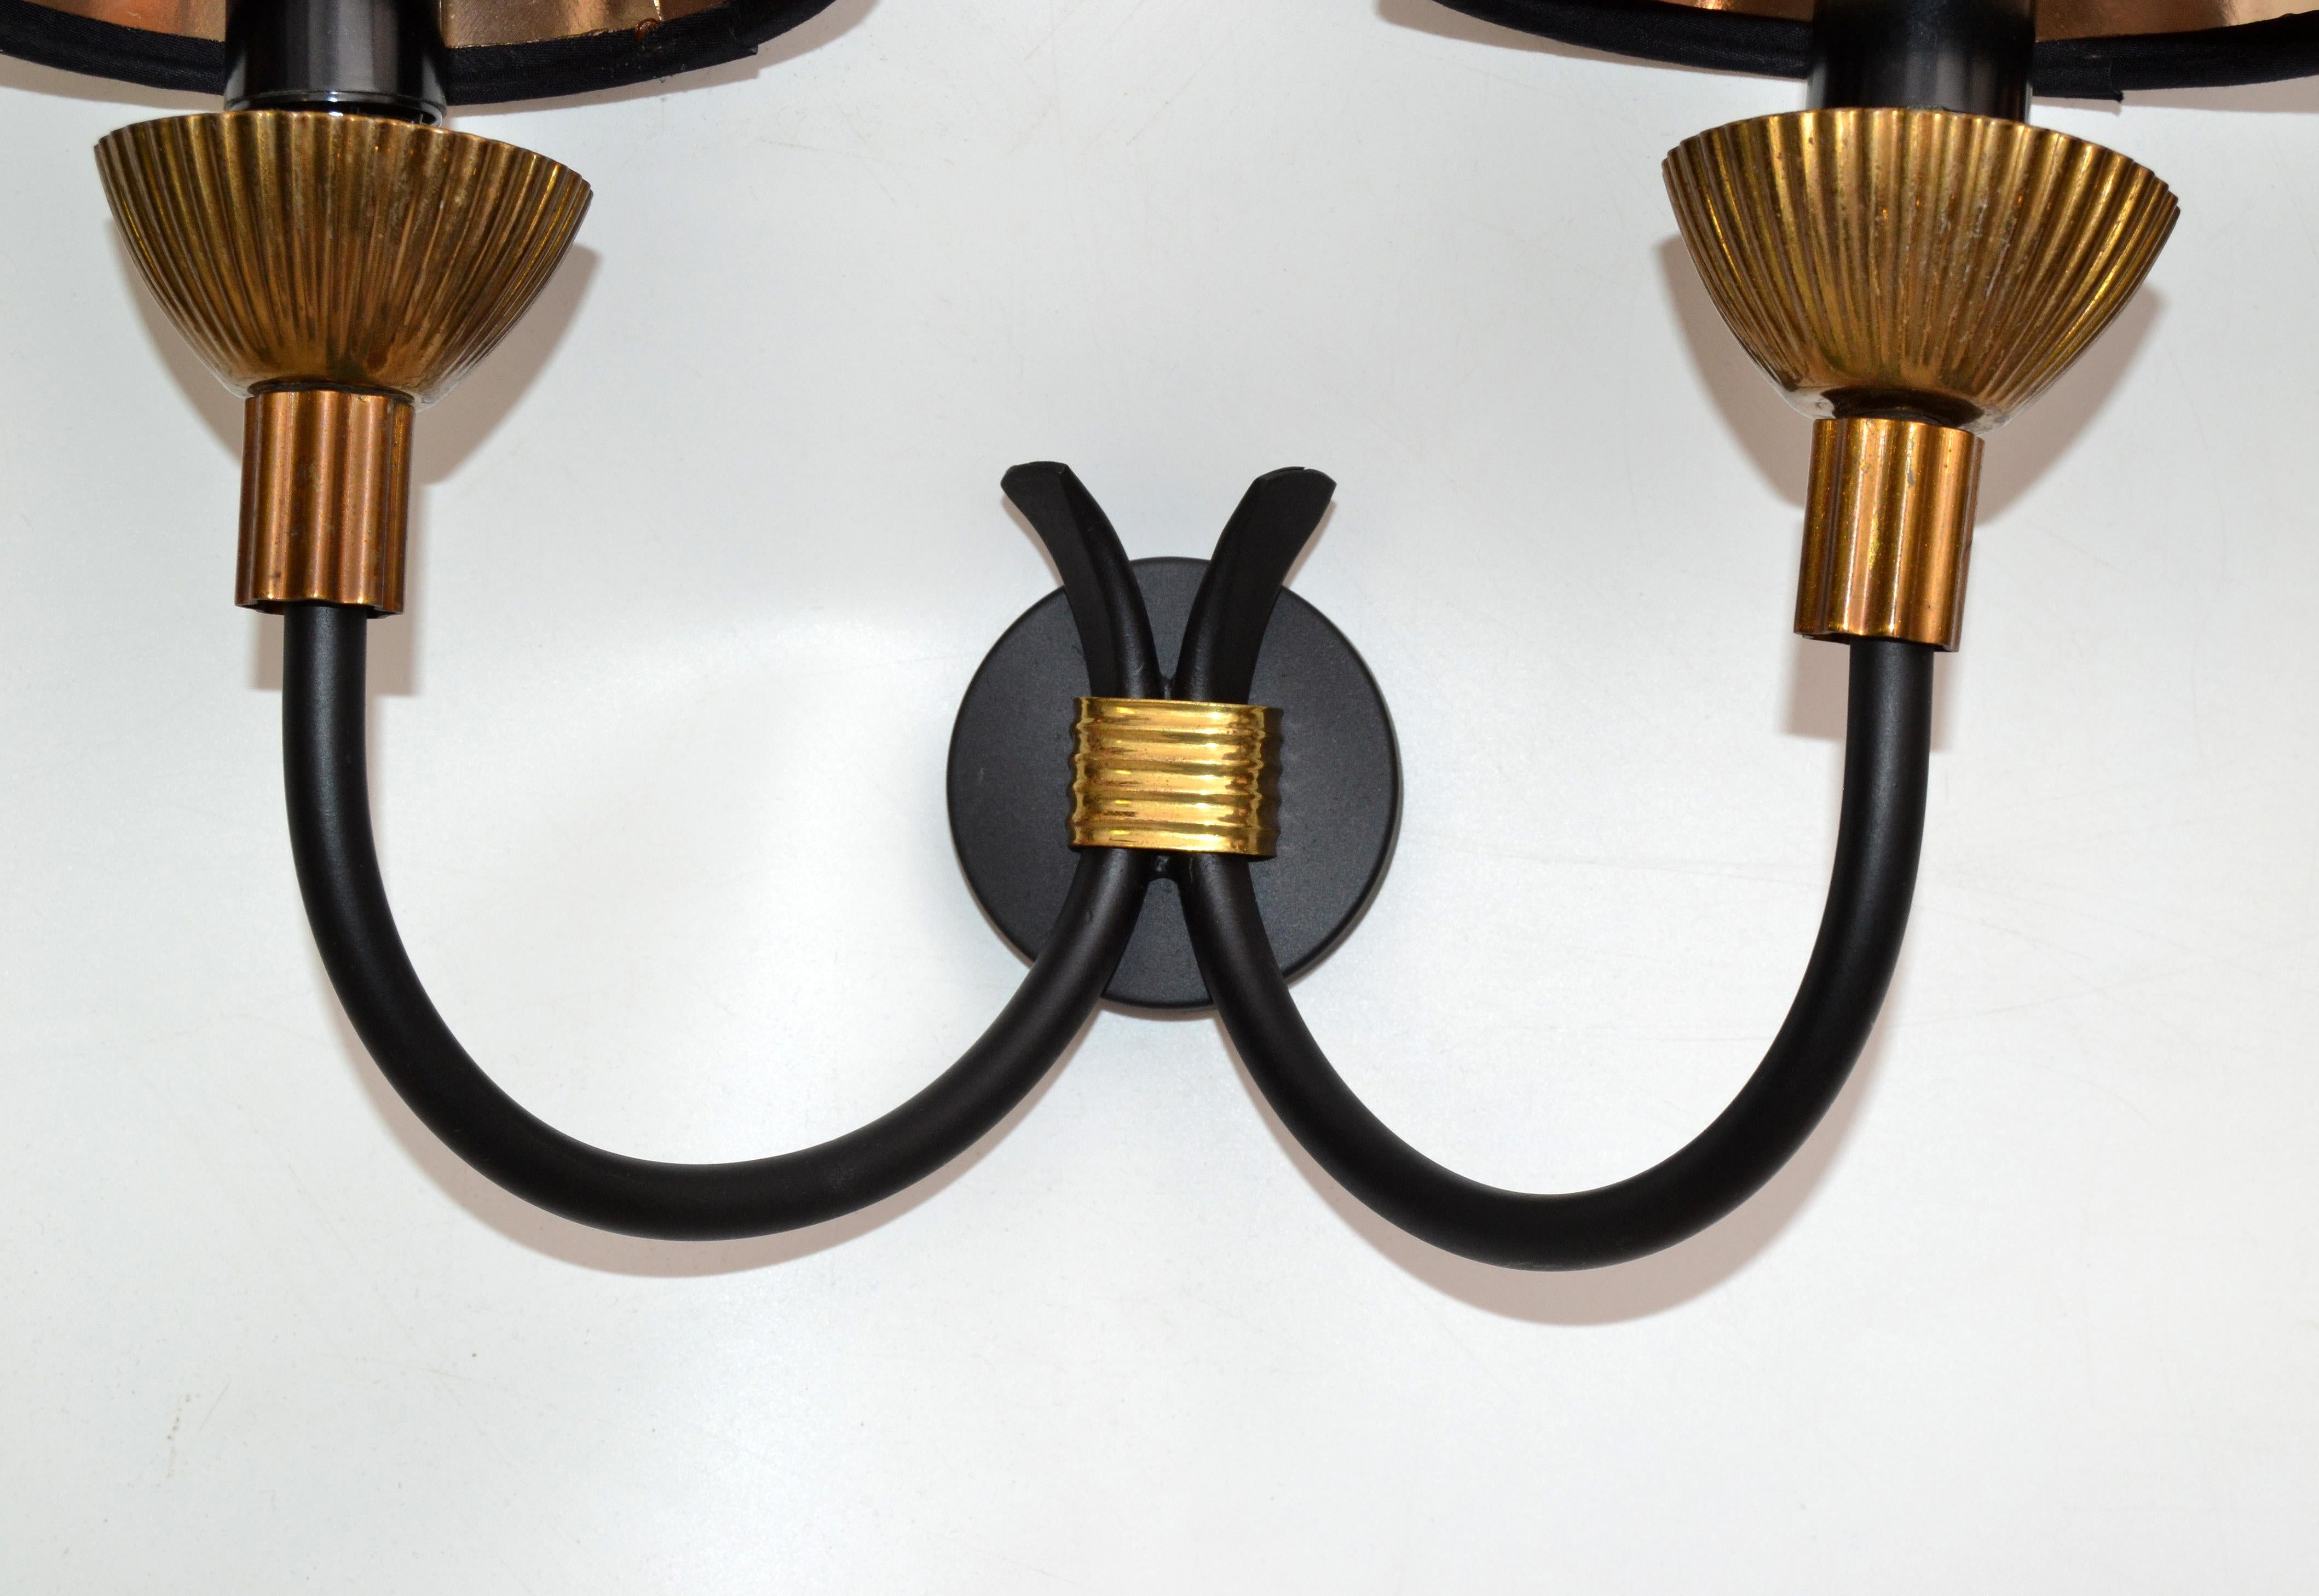 Maison Lunel Pair of Sconces Mid-Century Modern France, 2 pairs Available  4